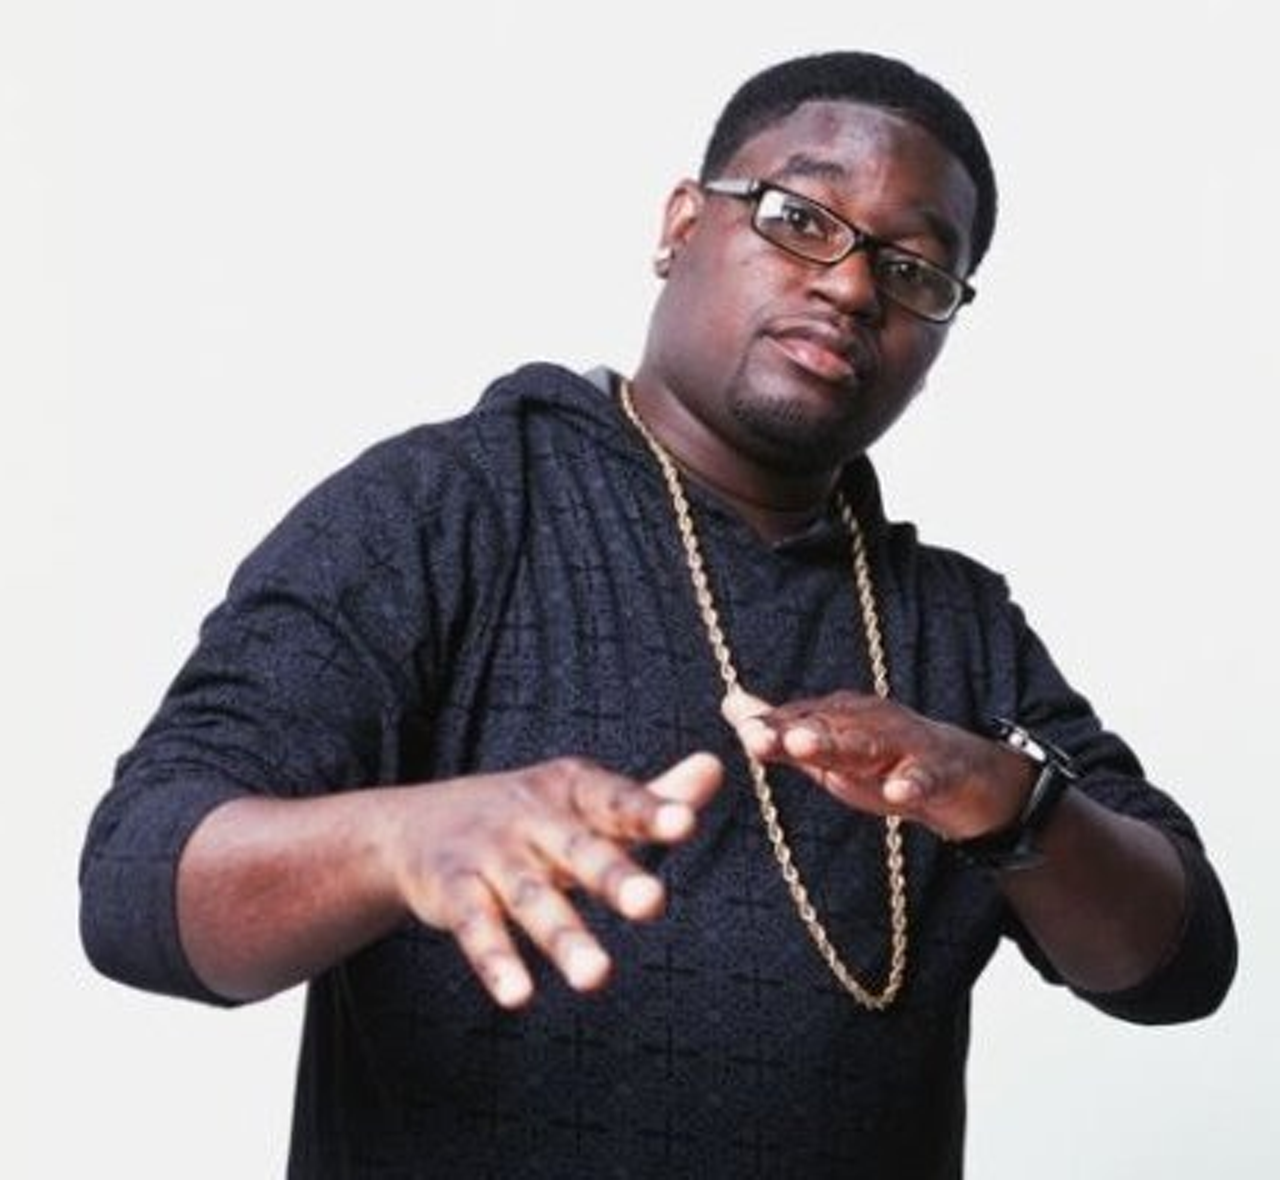 Lil Rel likes to talk about a lot of things: marriage, cable bills, a creepy old gym teacher he once had, his mother’s cigarette smoking. He claims he’d often get confused as to which parent was calling to him from other room: was that his Black Panther dad or his gruff, chainsmoking mom? Don’t you confuse his name, though. Lil Rel is a manly man and he makes sure you know it. Don’t ever violate his “Man Laws” and ask him his astrological sign or wait to make sure he gets in his door when you drop him off. He’s been on Last Comic Standing and is slated to appear on the new reboot of In Living Color. He performs tonight at 7:30 at the Improv and has shows scheduled through Sunday. Tickets are $22. (Trenholme)